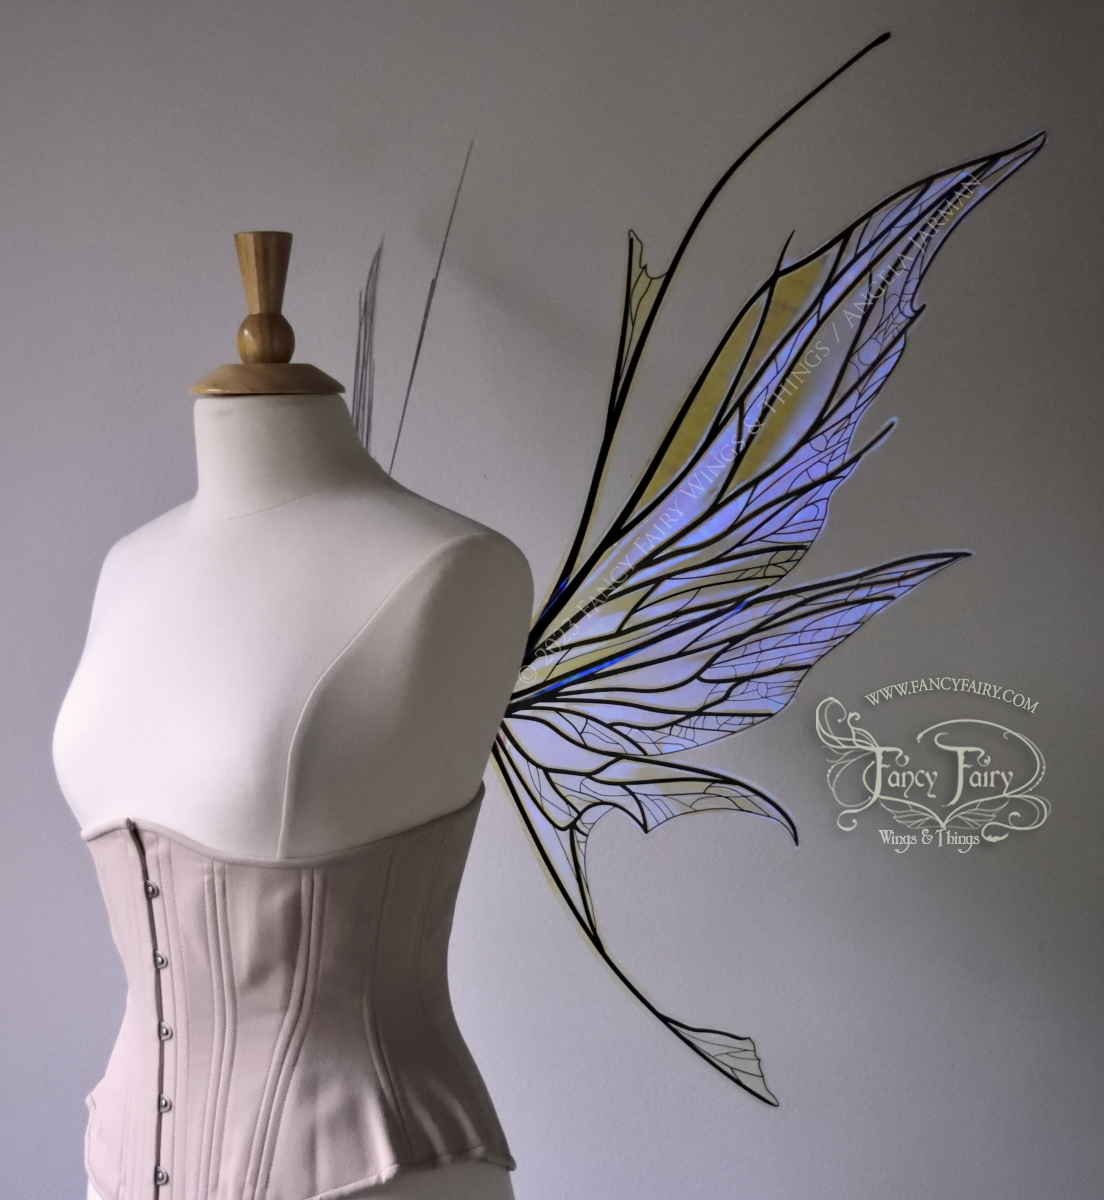 Right side view of a dress form wearing an underbust corset & large violet iridescent fairy wings with antennae, black veins, spikey shapes